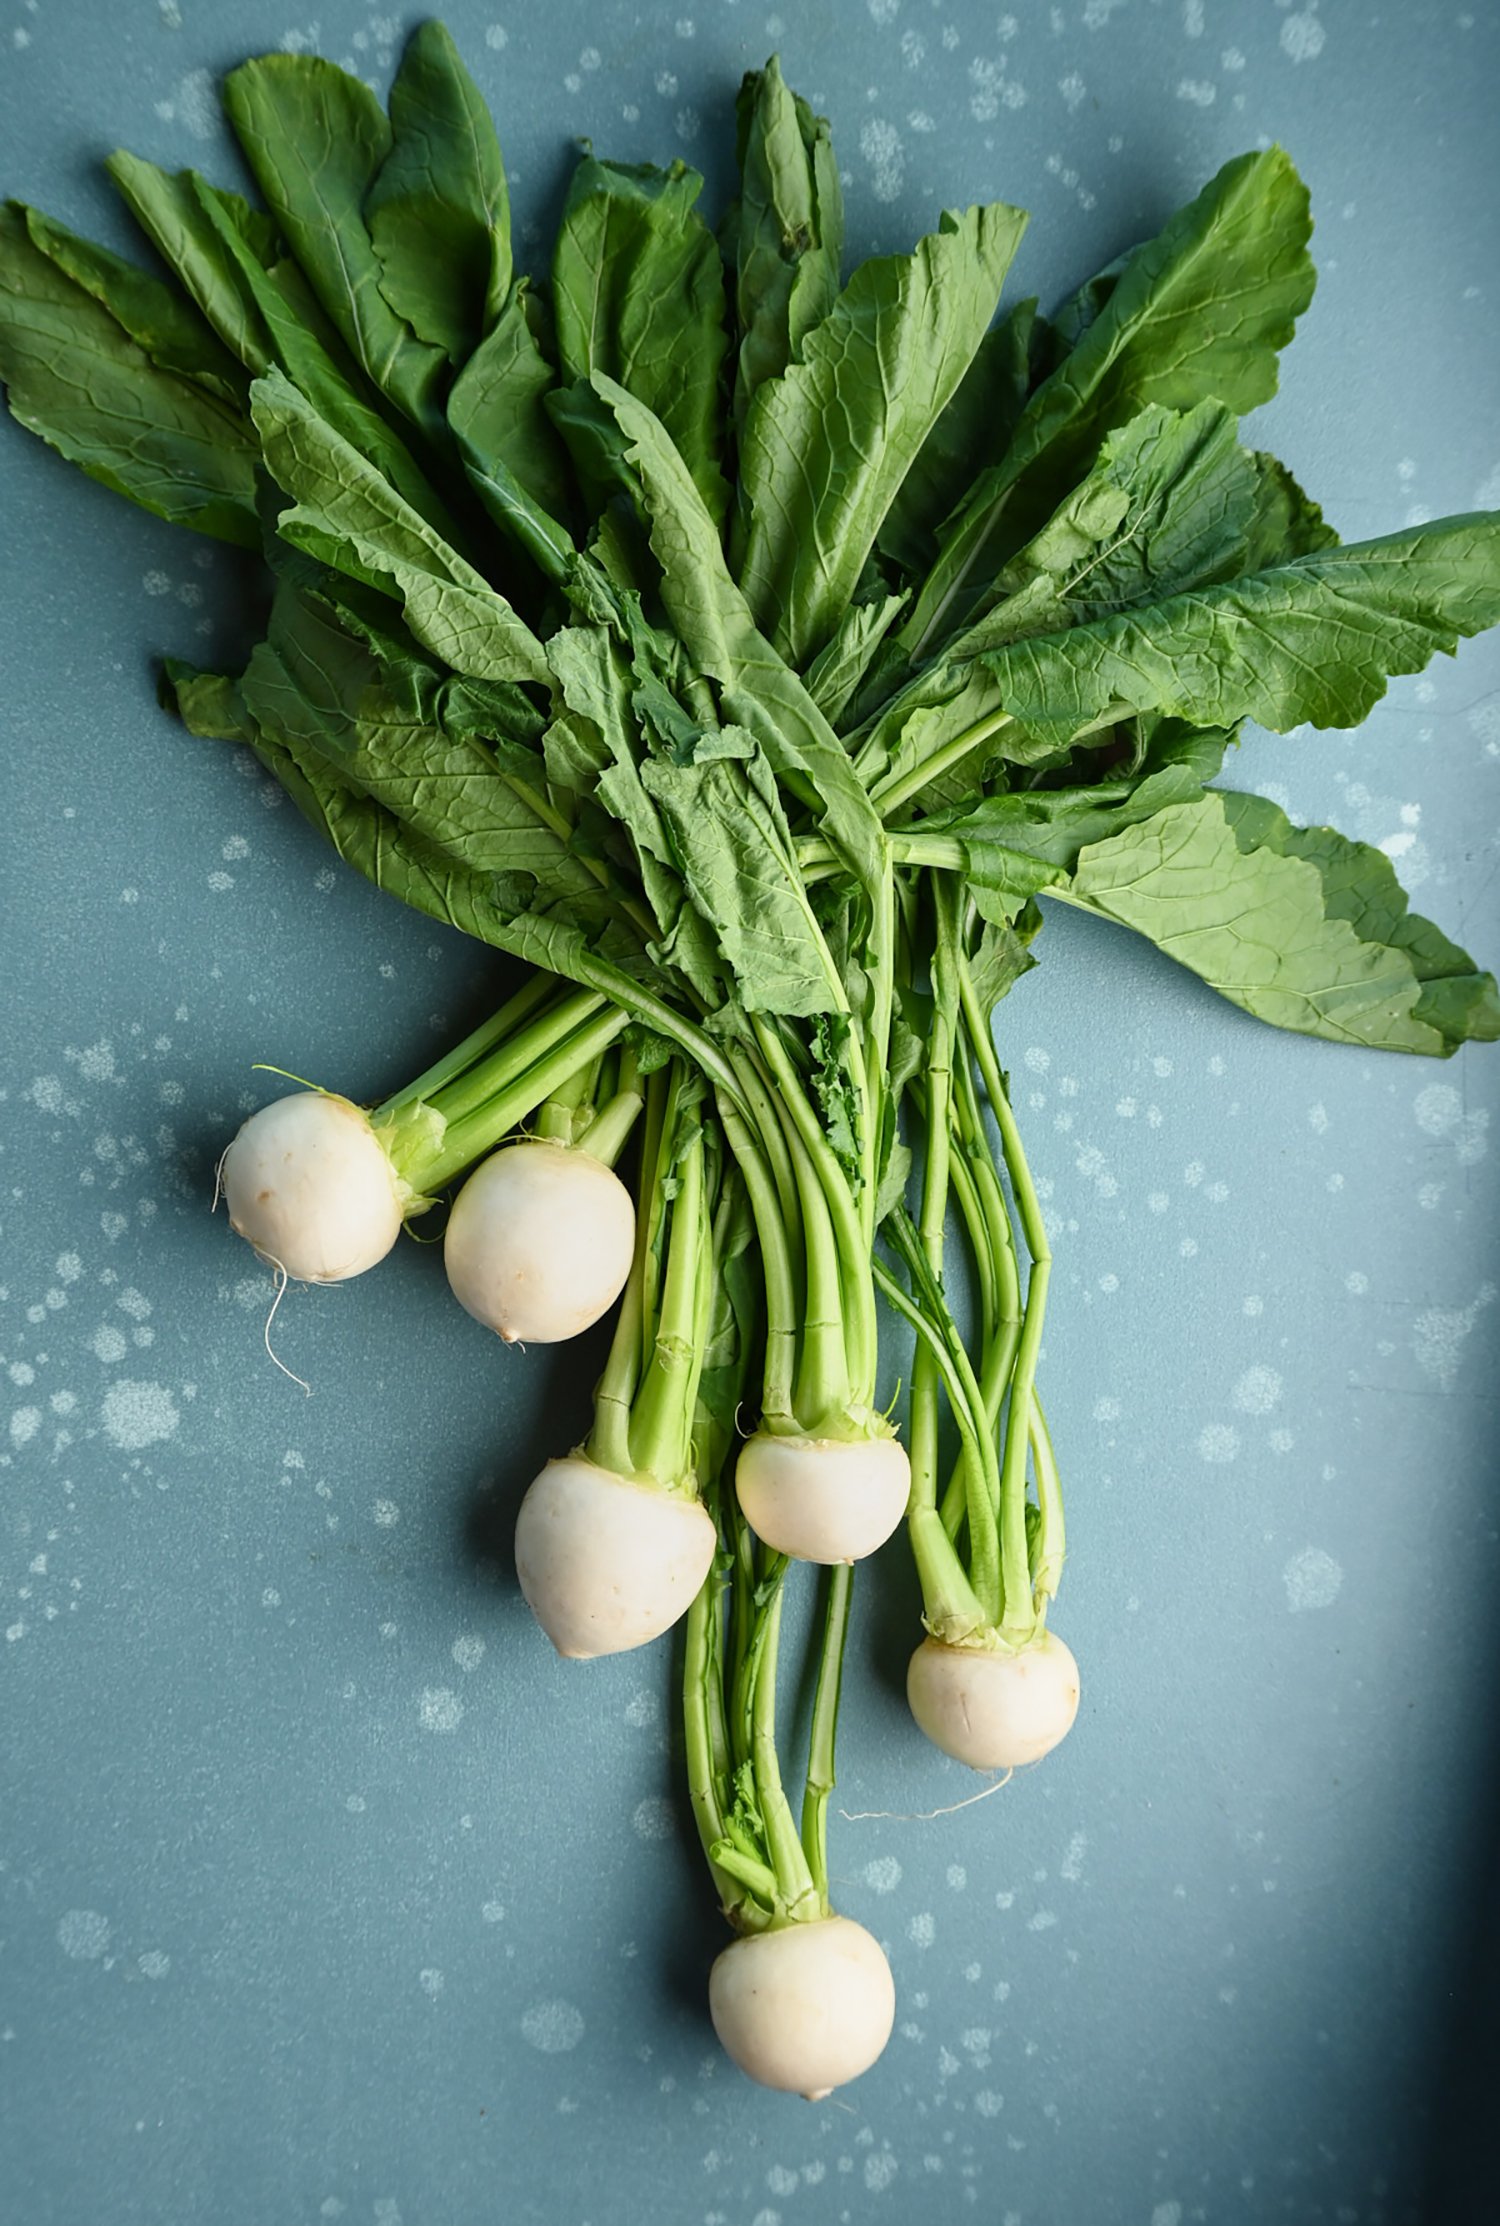 Tokyo turnips on a blue table top